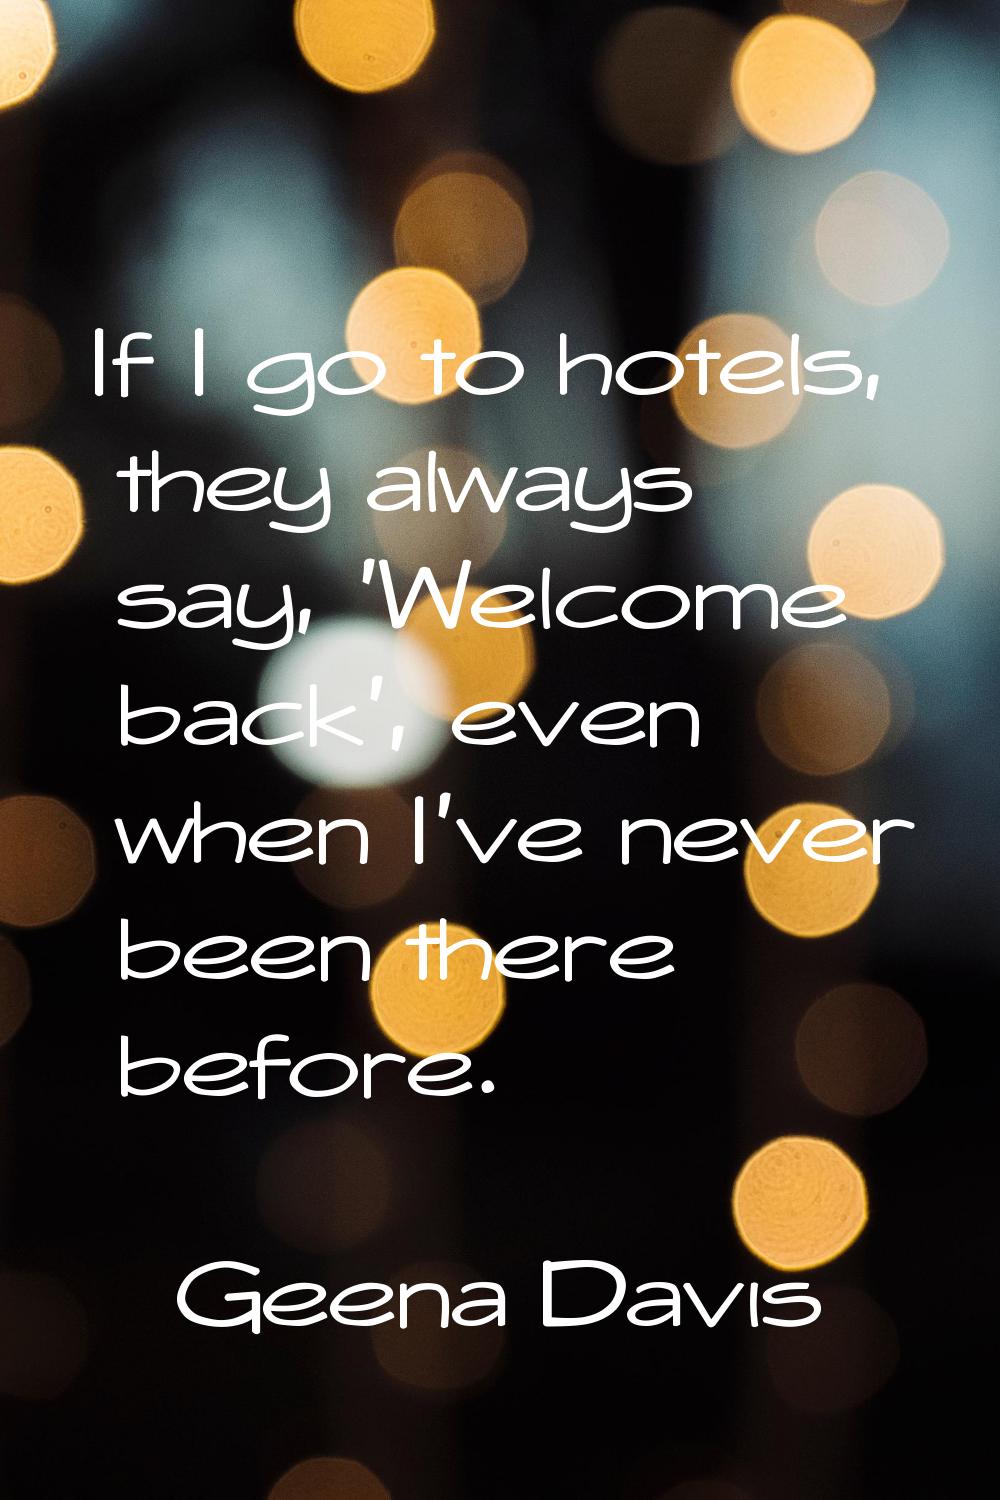 If I go to hotels, they always say, 'Welcome back', even when I've never been there before.